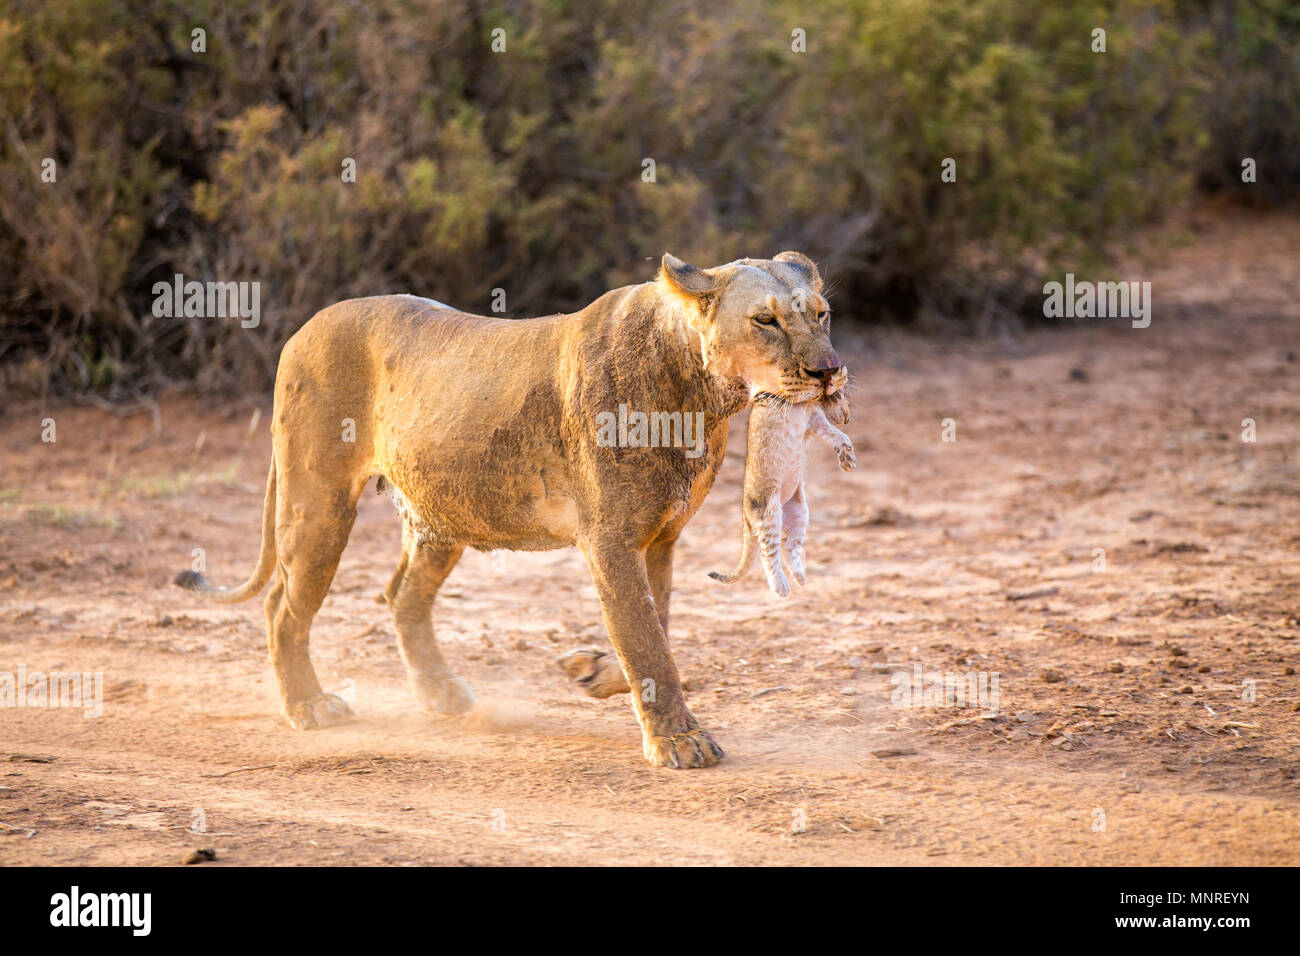 Lioness carrying cub in her mouth in national reserve in Kenya Stock Photo